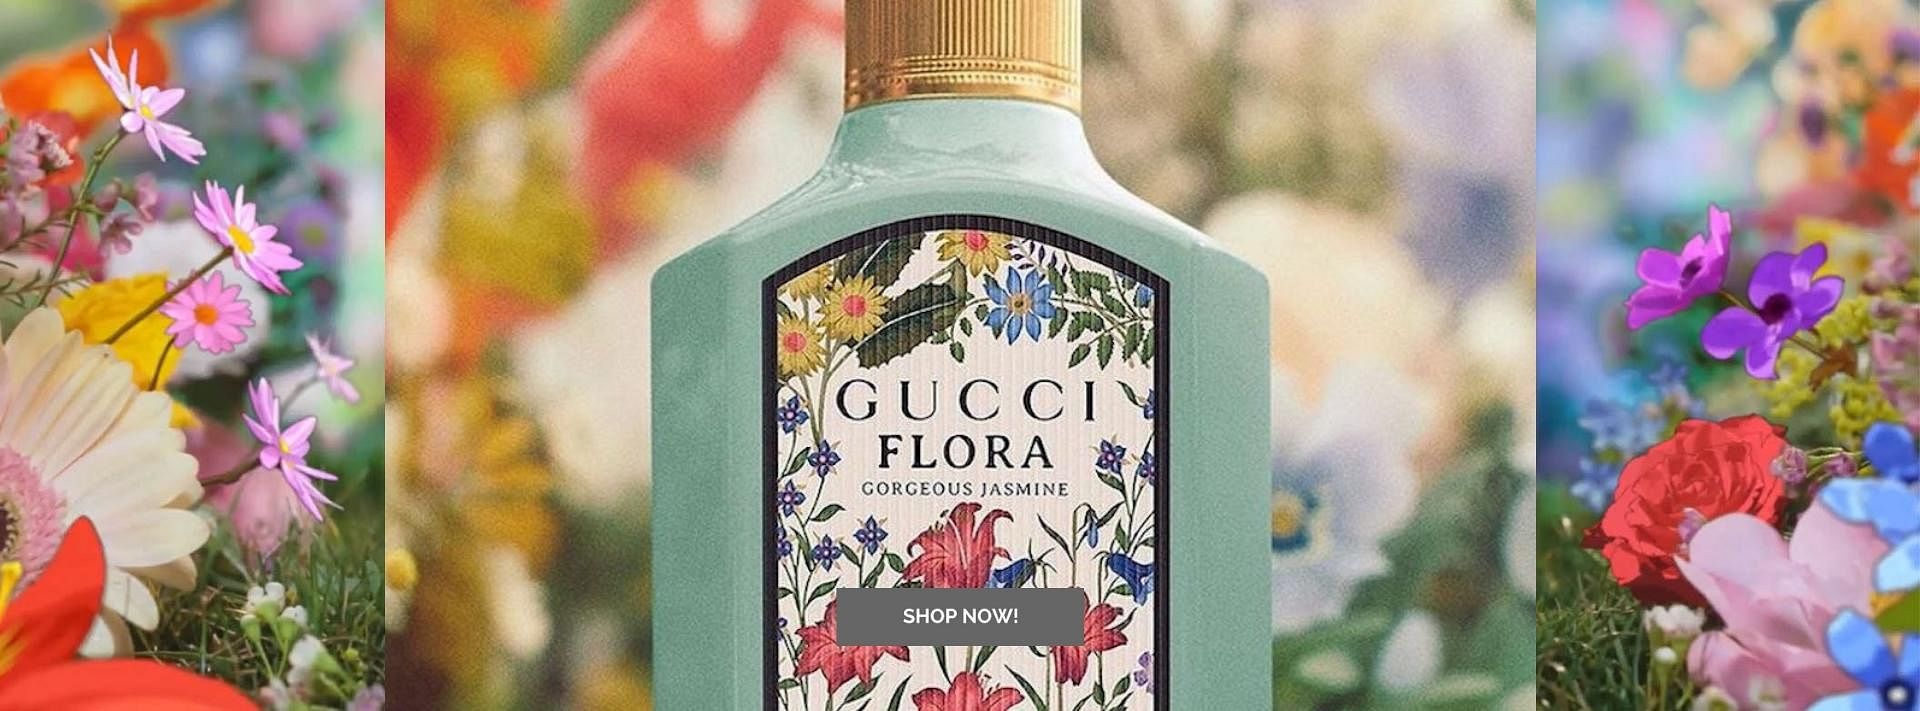 Discover the new fragrance by Gucci